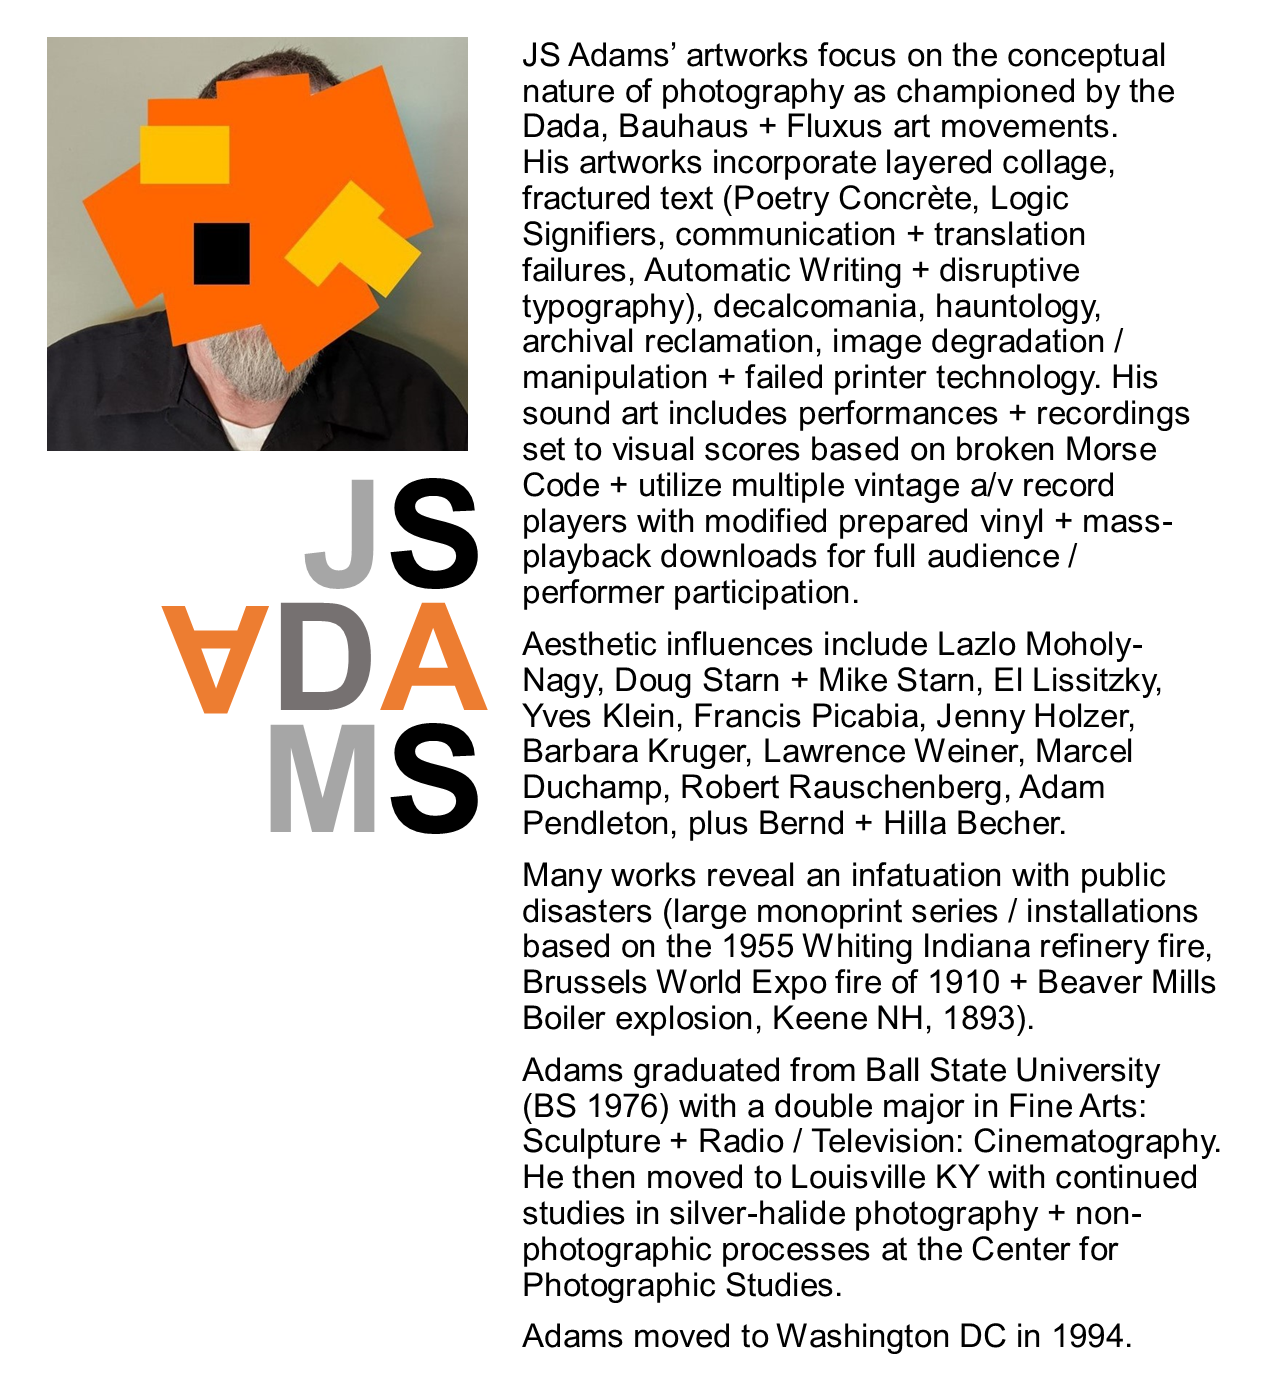 Website for JS Adams, including artist’s statement / aesthetic influences on art and music.